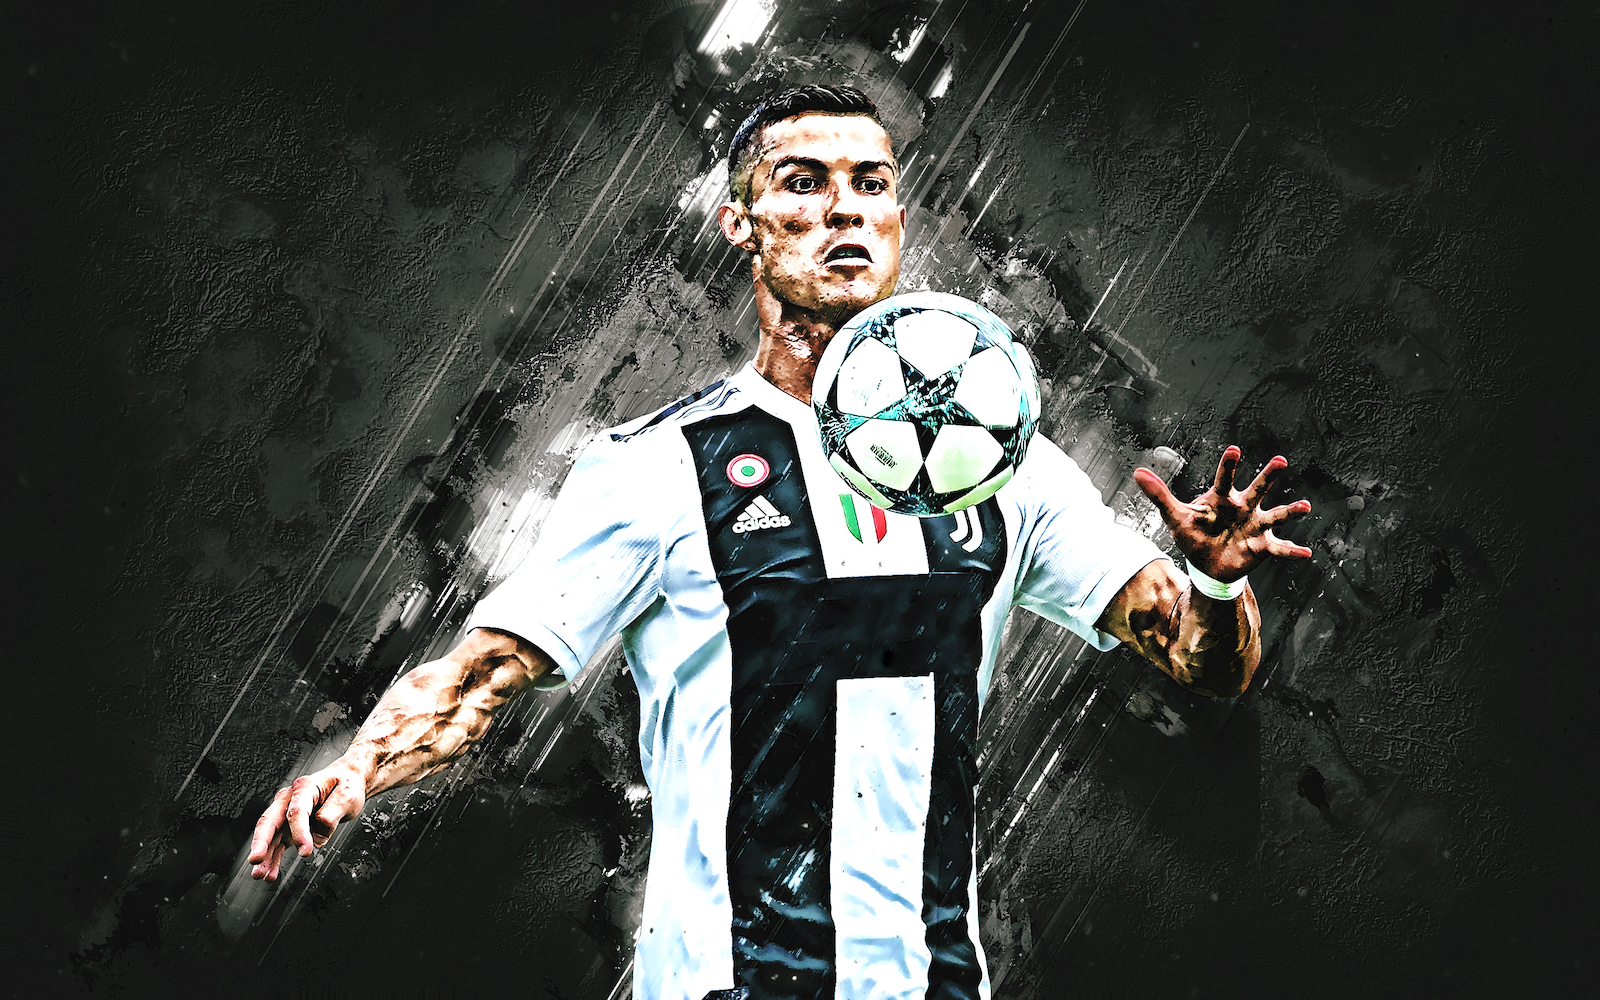 cr7s club juventus football club debuts its crypto based token for its fans bitcoin exchange guide - Home Page